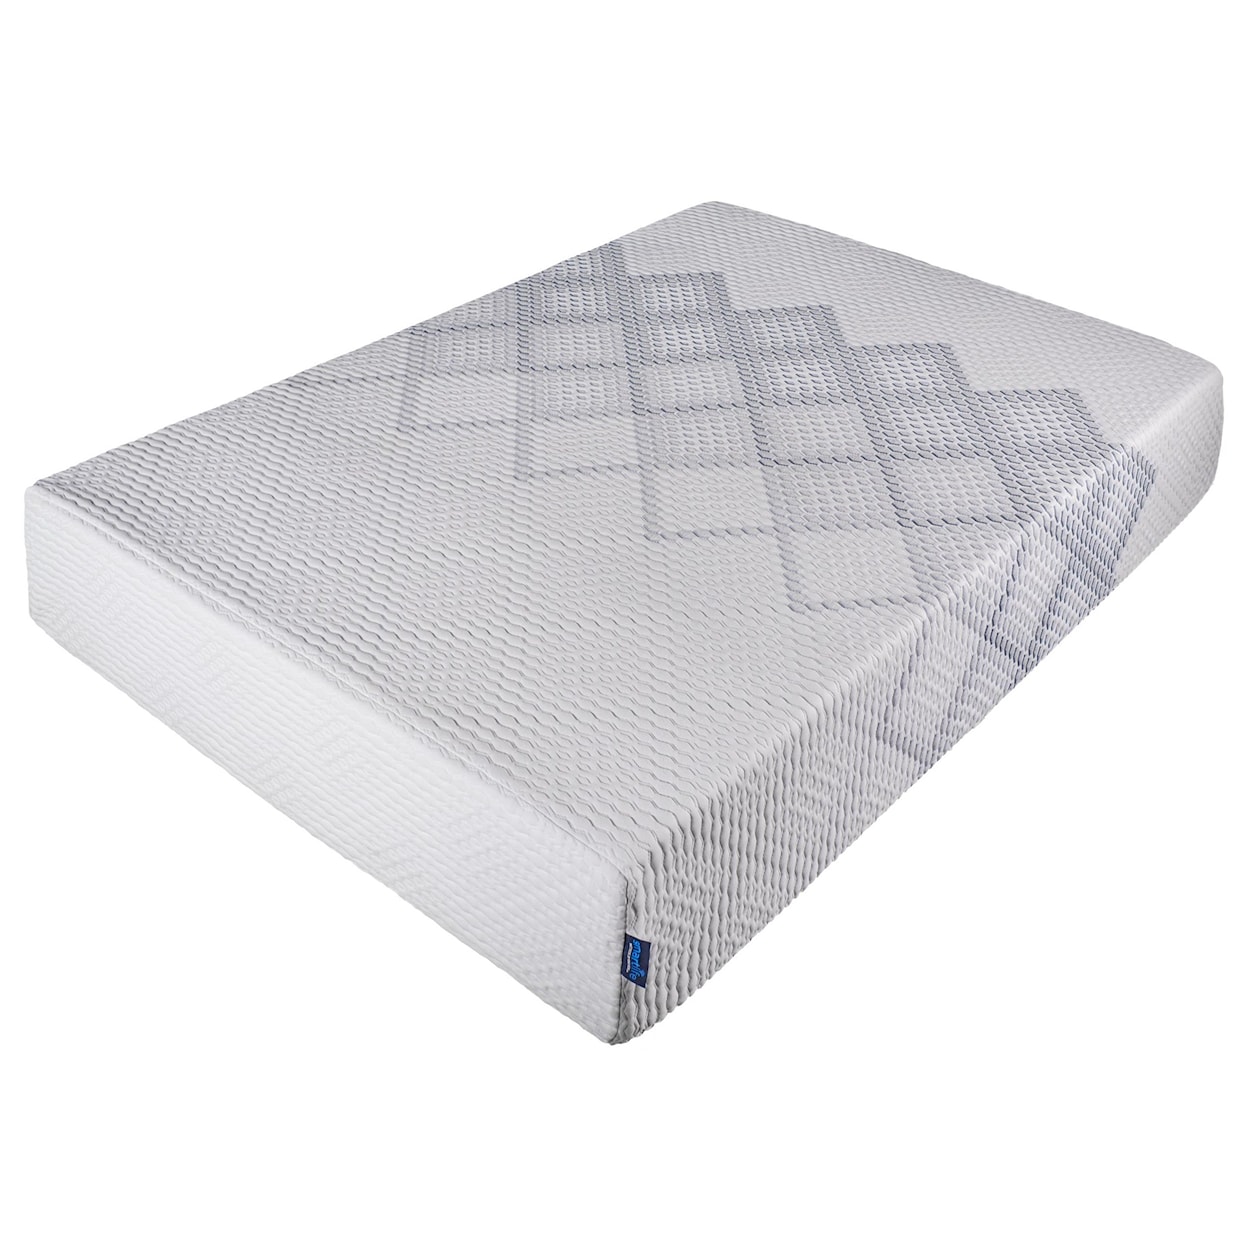 King Koil Lily Medium Mattress with Remote Lily King Medium Mattress w/Remote